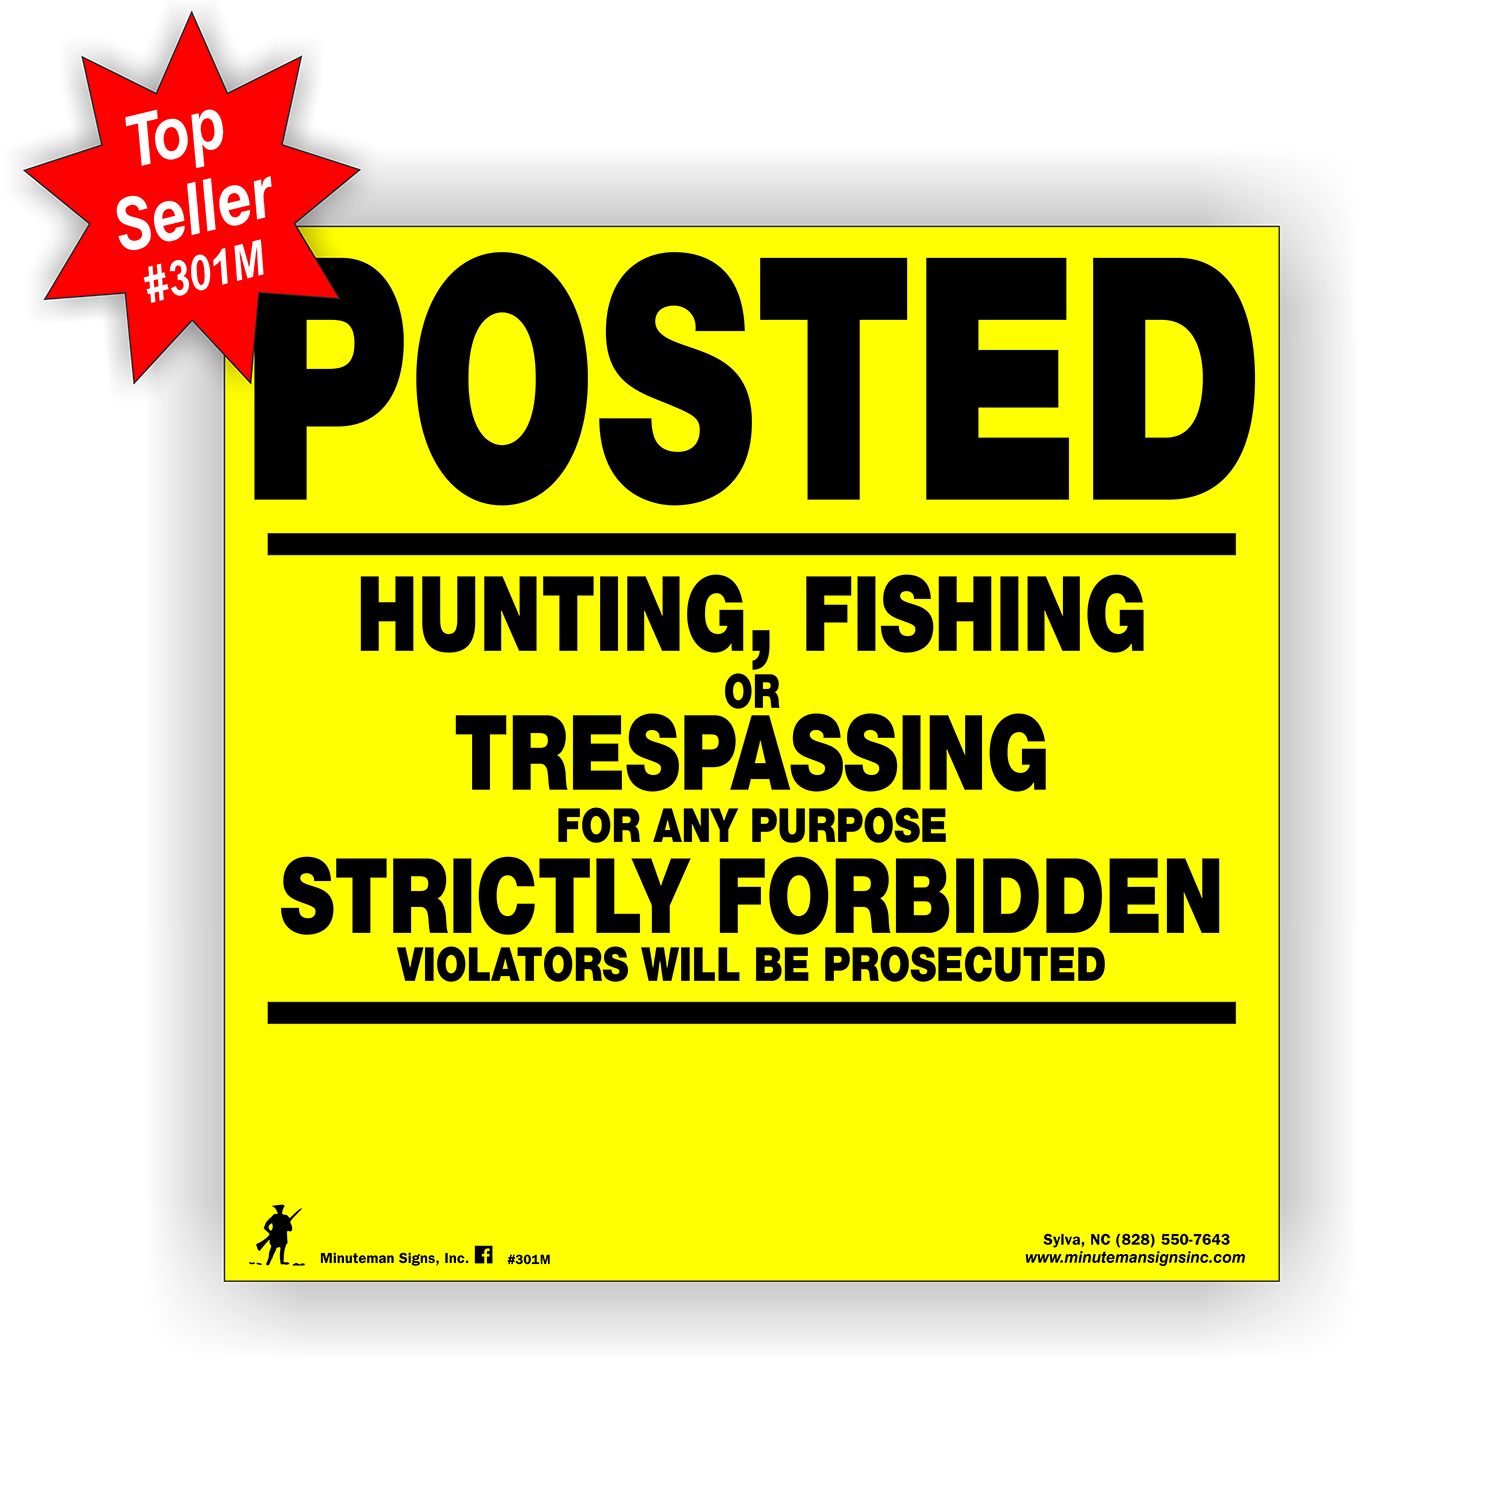 https://www.notrespassingsigns.us/wp-content/uploads/minuteman-posted-hunting-original-301M-top-seller-badge-yellow-sign-2.png